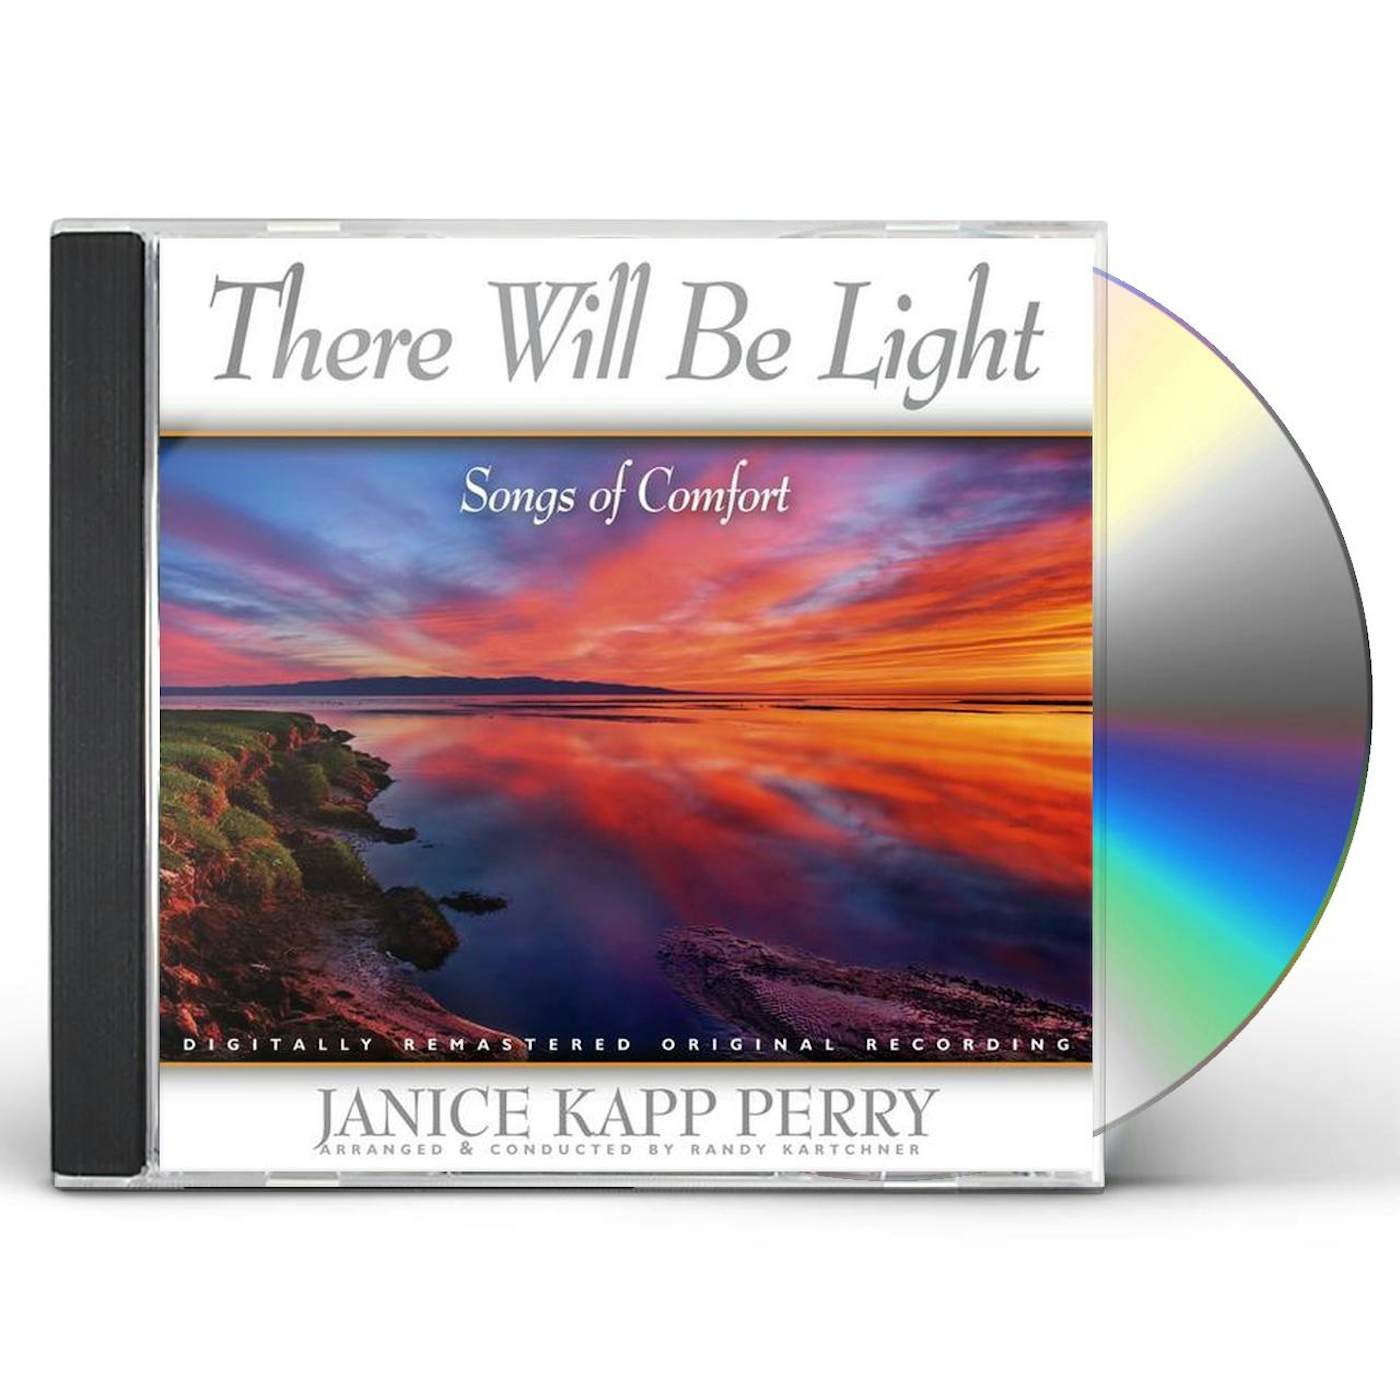 Janice Kapp Perry THERE WILL BE LIGHT CD